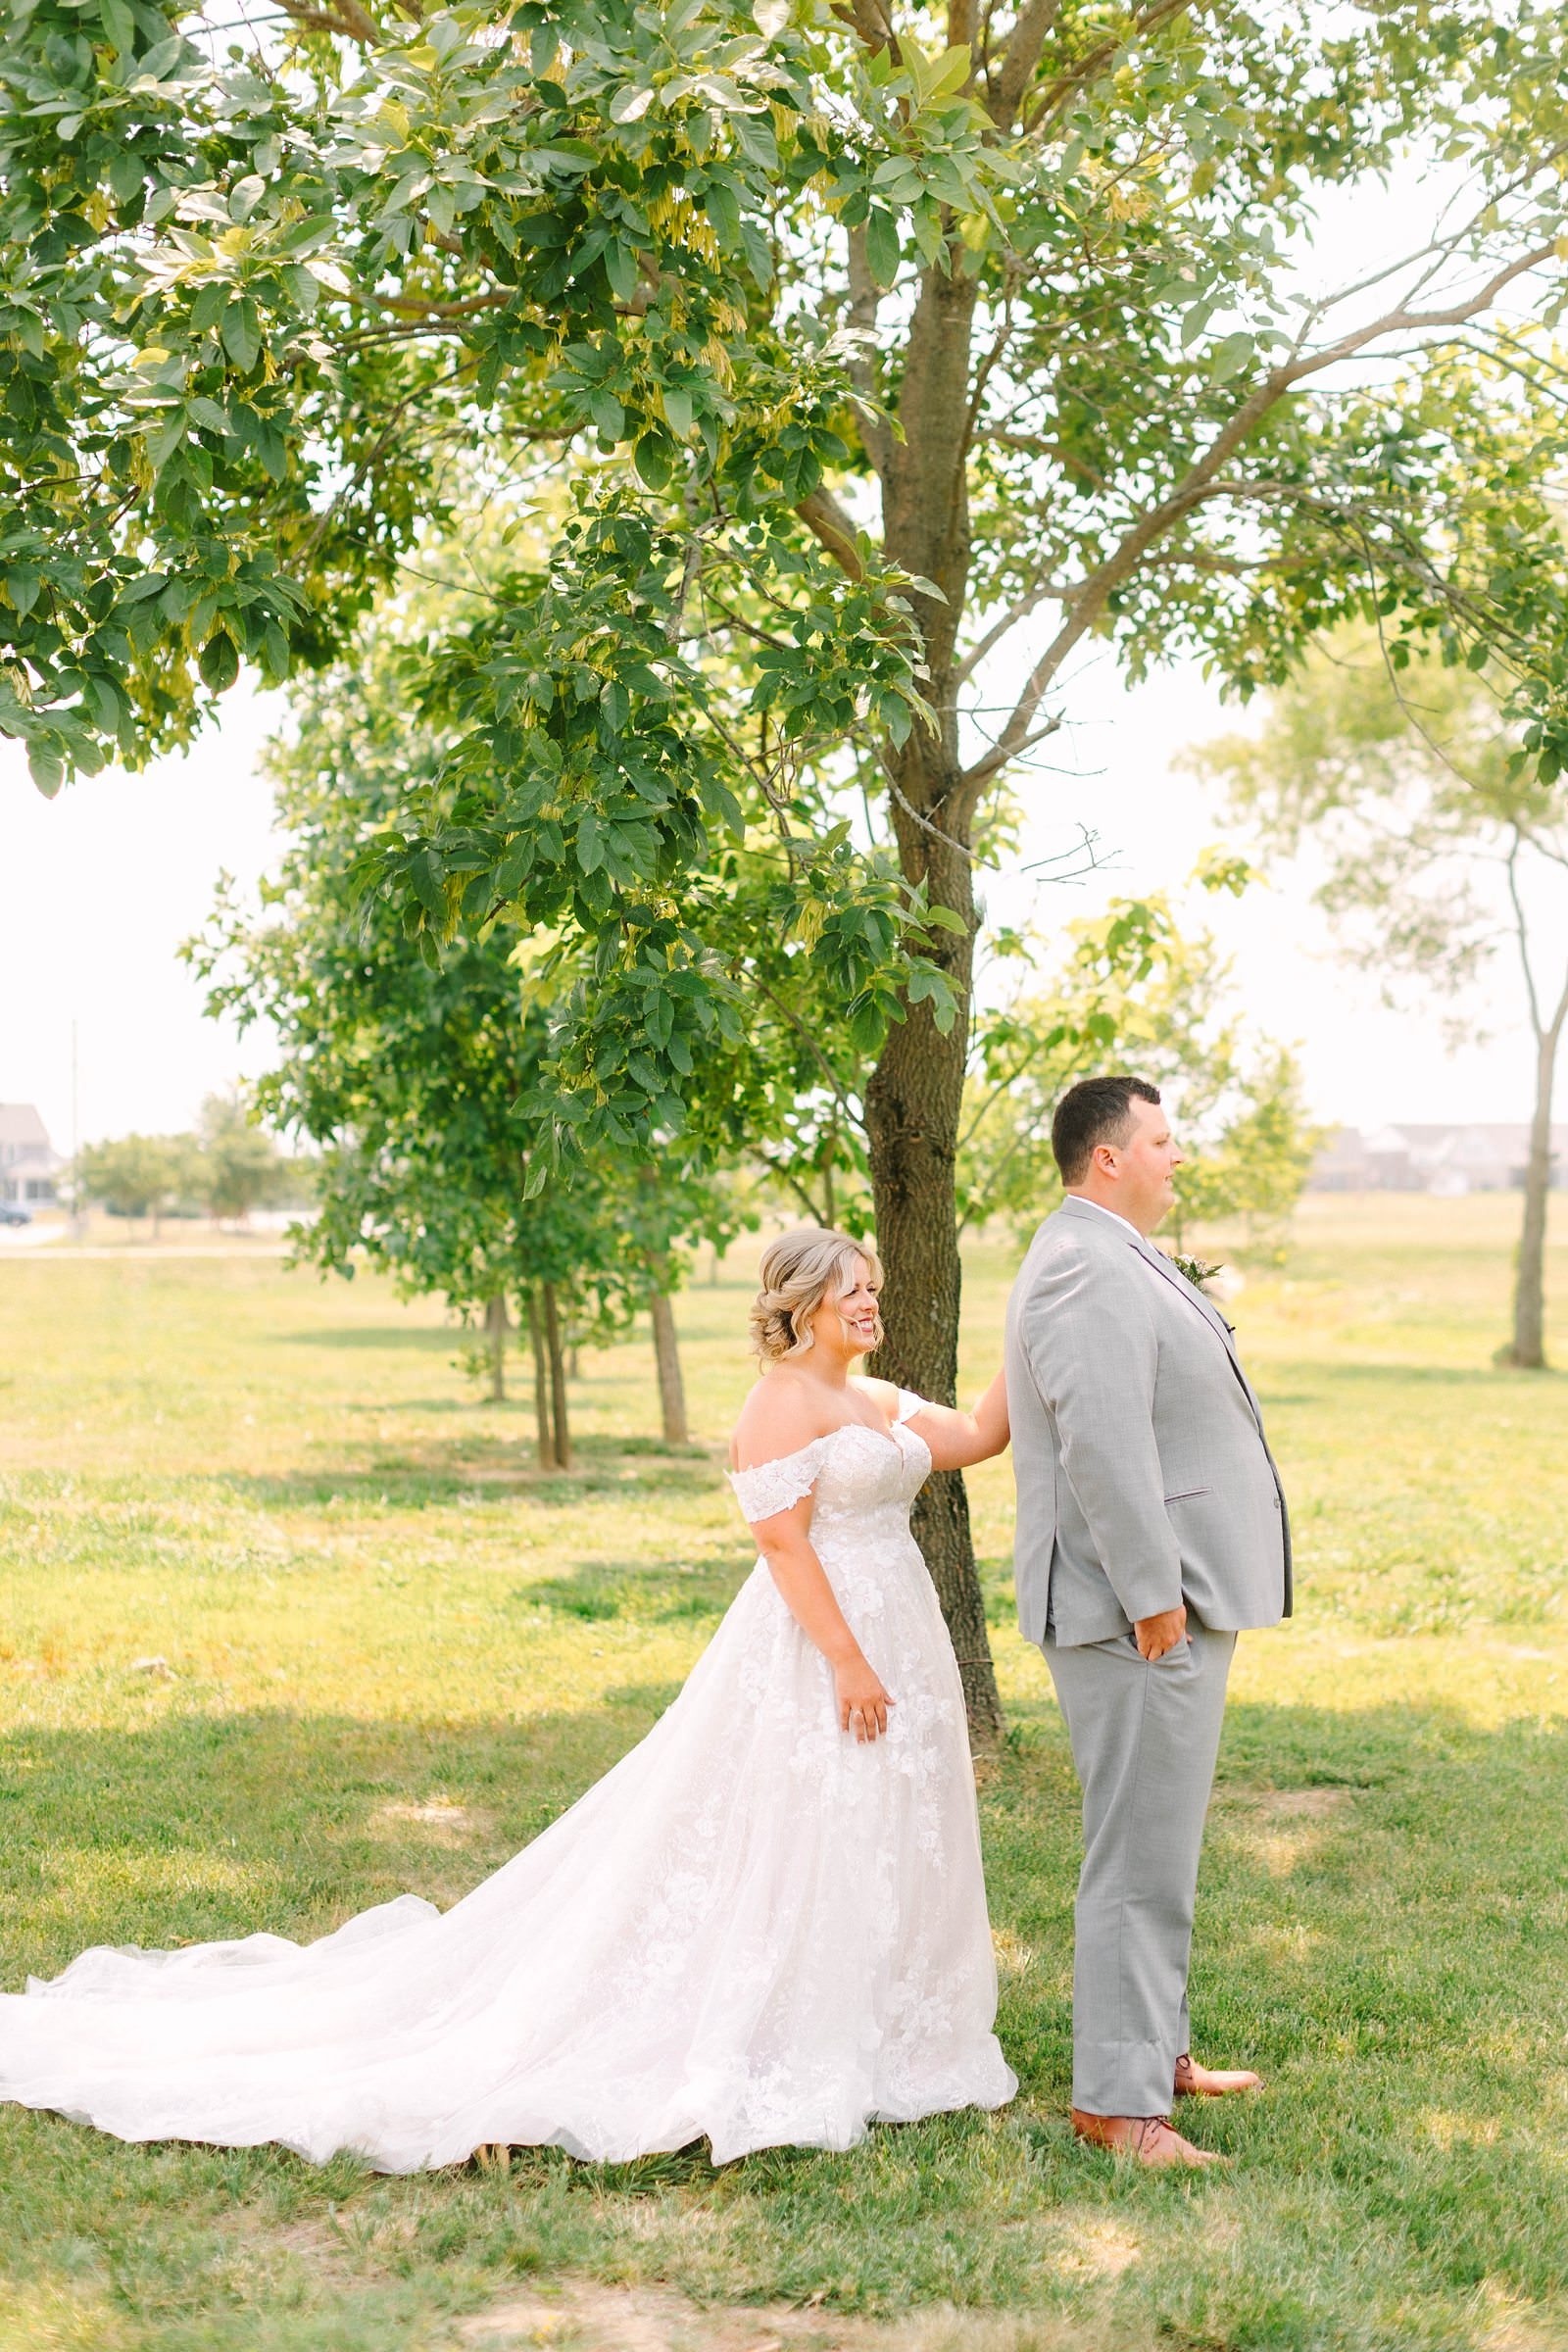 A Sunny Summer Wedding at Friedman Park in Newburgh Indiana | Paige and Dylan | Bret and Brandie Photography061.jpg